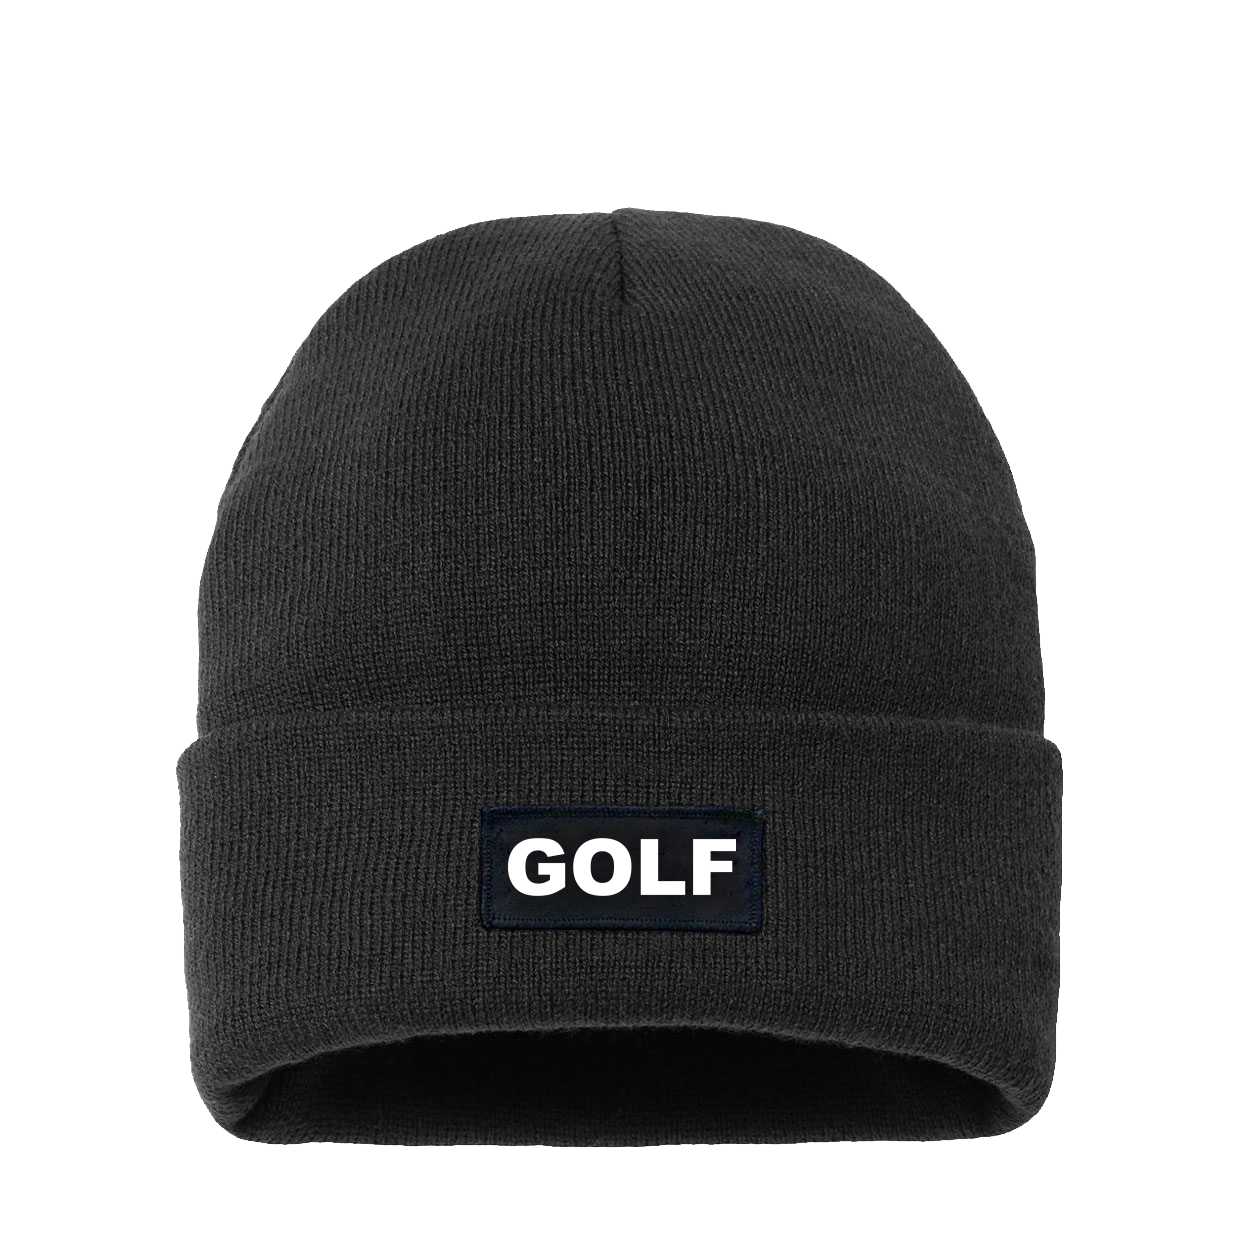 Golf Brand Logo Night Out Woven Patch Night Out Sherpa Lined Cuffed Beanie Black